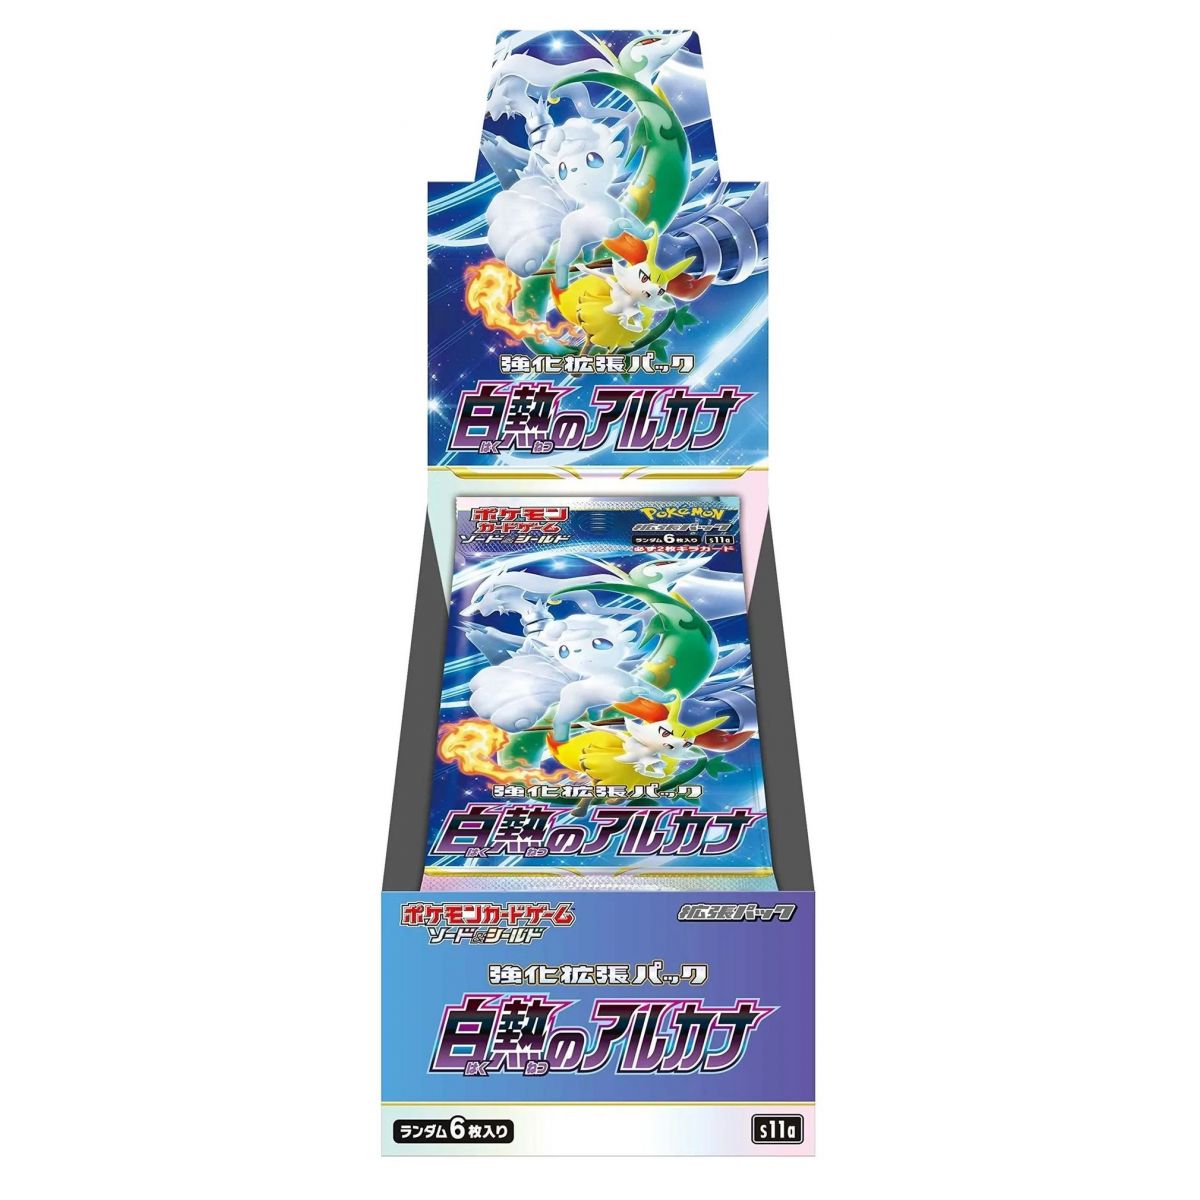 Item Pokémon - Display - Box of 20 Boosters - Incandescent Arcana [S11a] - JP